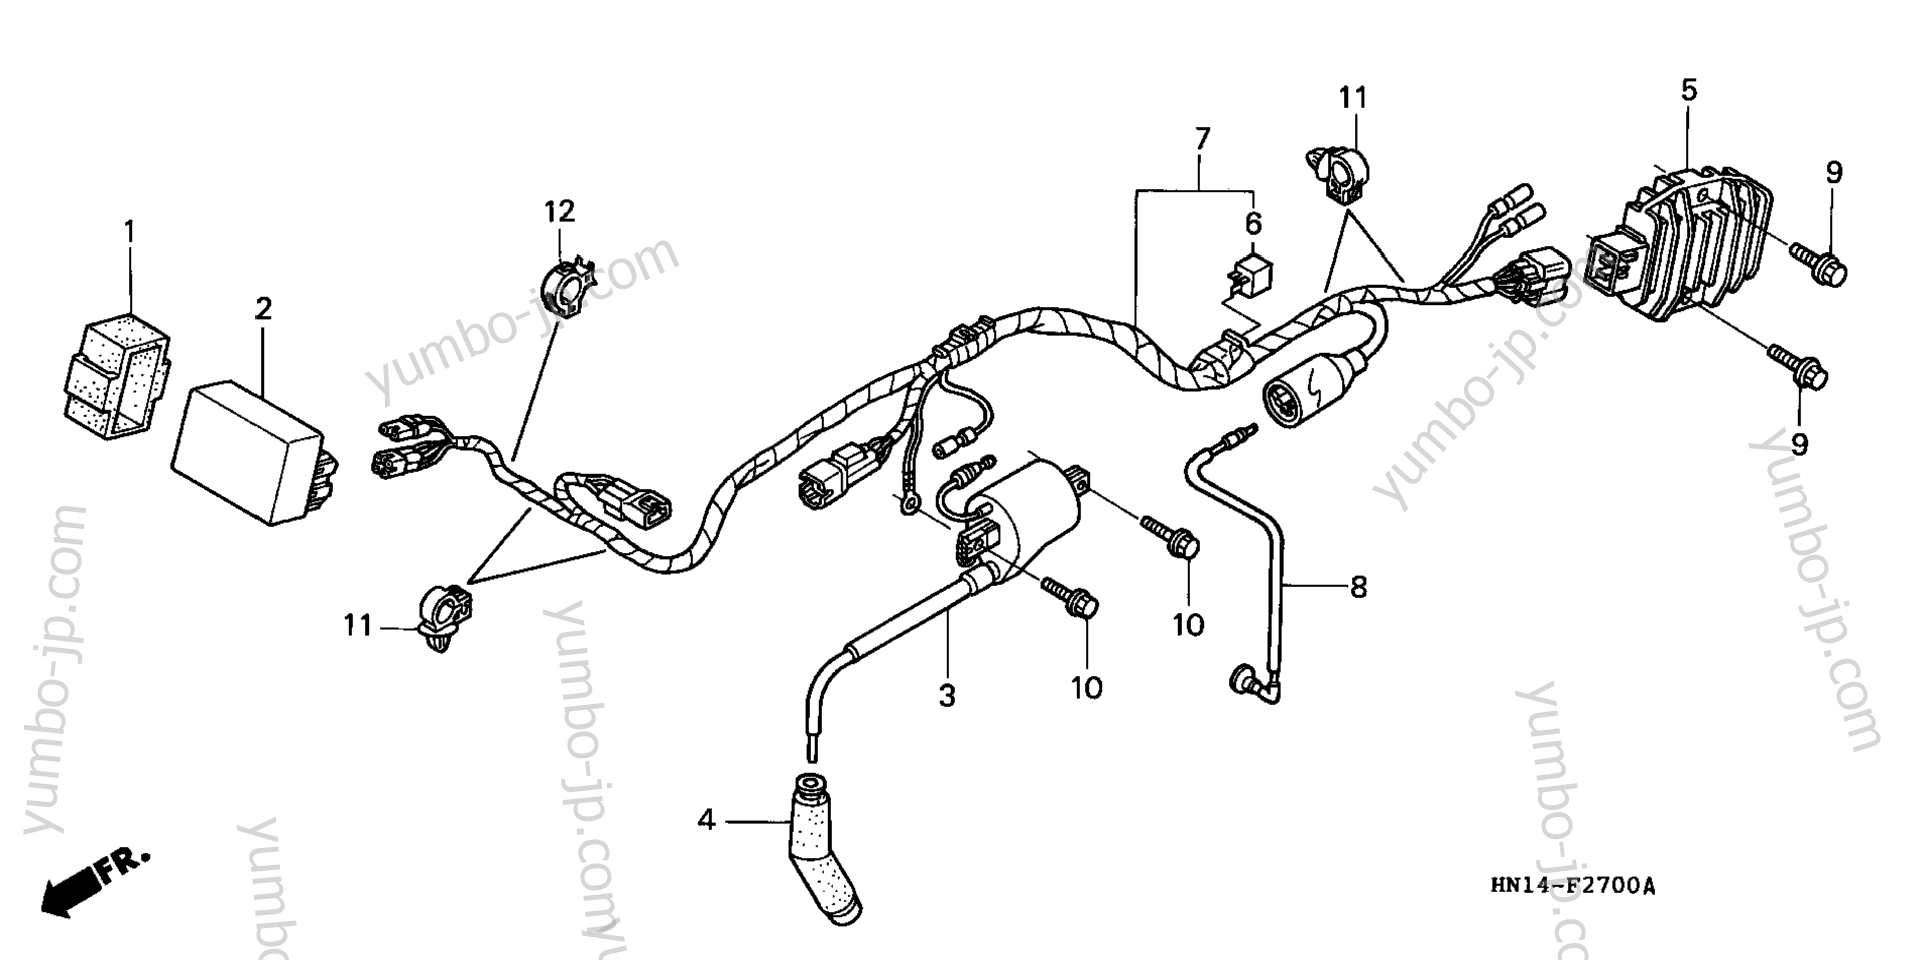 WIRE HARNESS ('99-'04) for ATVs HONDA TRX400EX A 2003 year